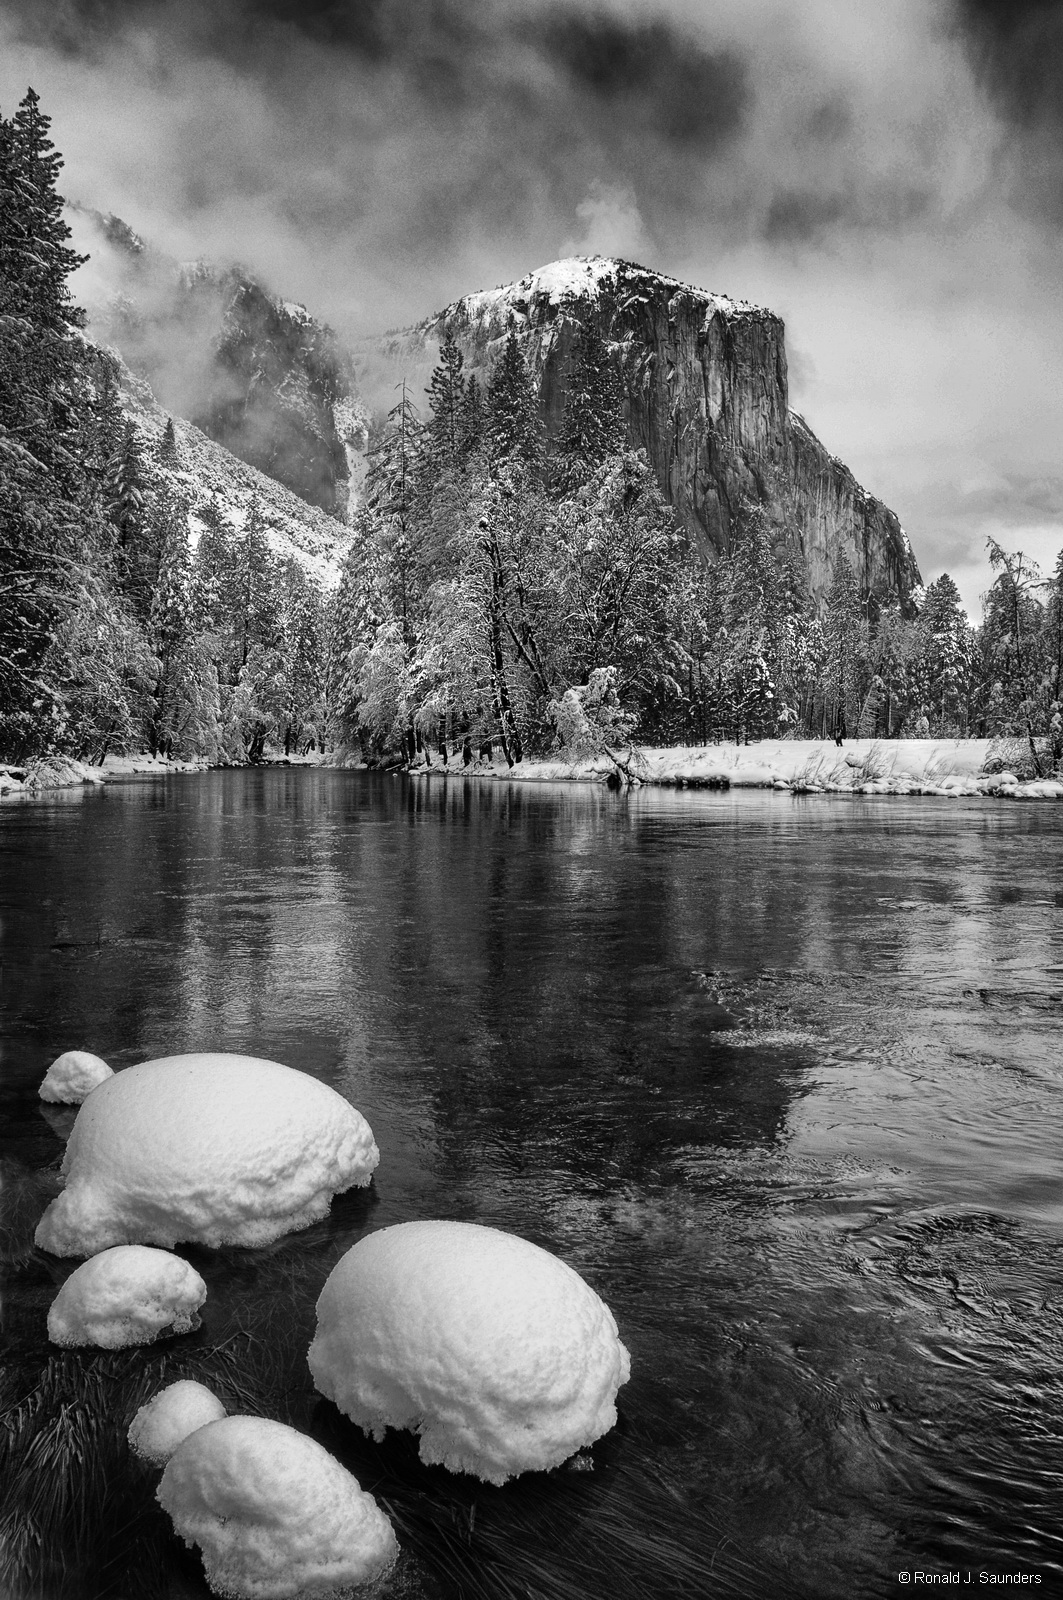 Winter is the nicest time to be in Yosemite. The scenery is outstanding, always changing weather, and the crowds are at the lowest...